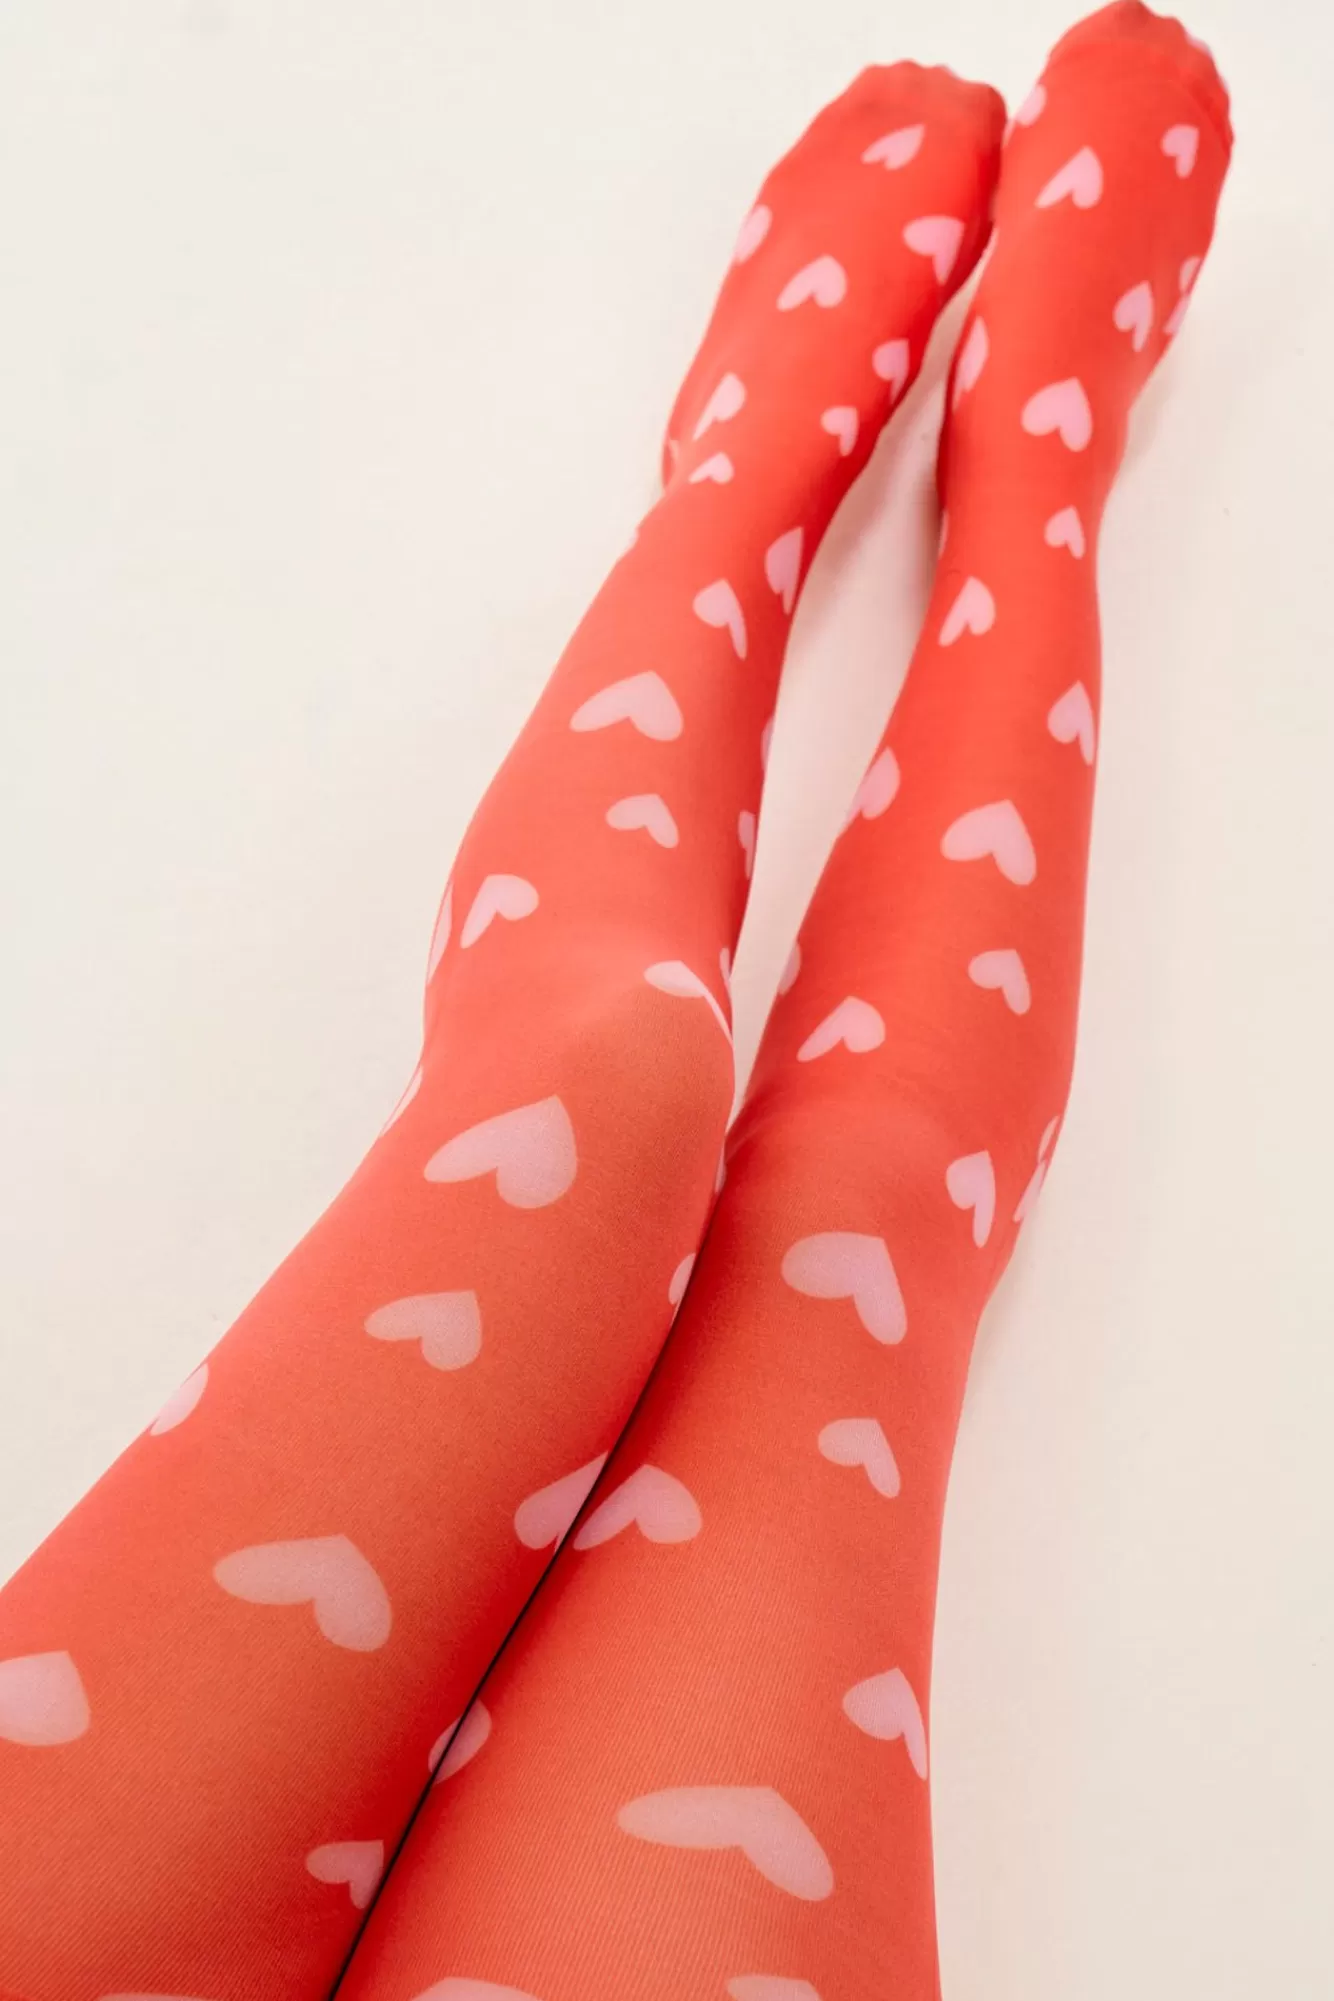 Better Tights & Yak: 50 Denier - Cupid-Lucy & Yak Clearance